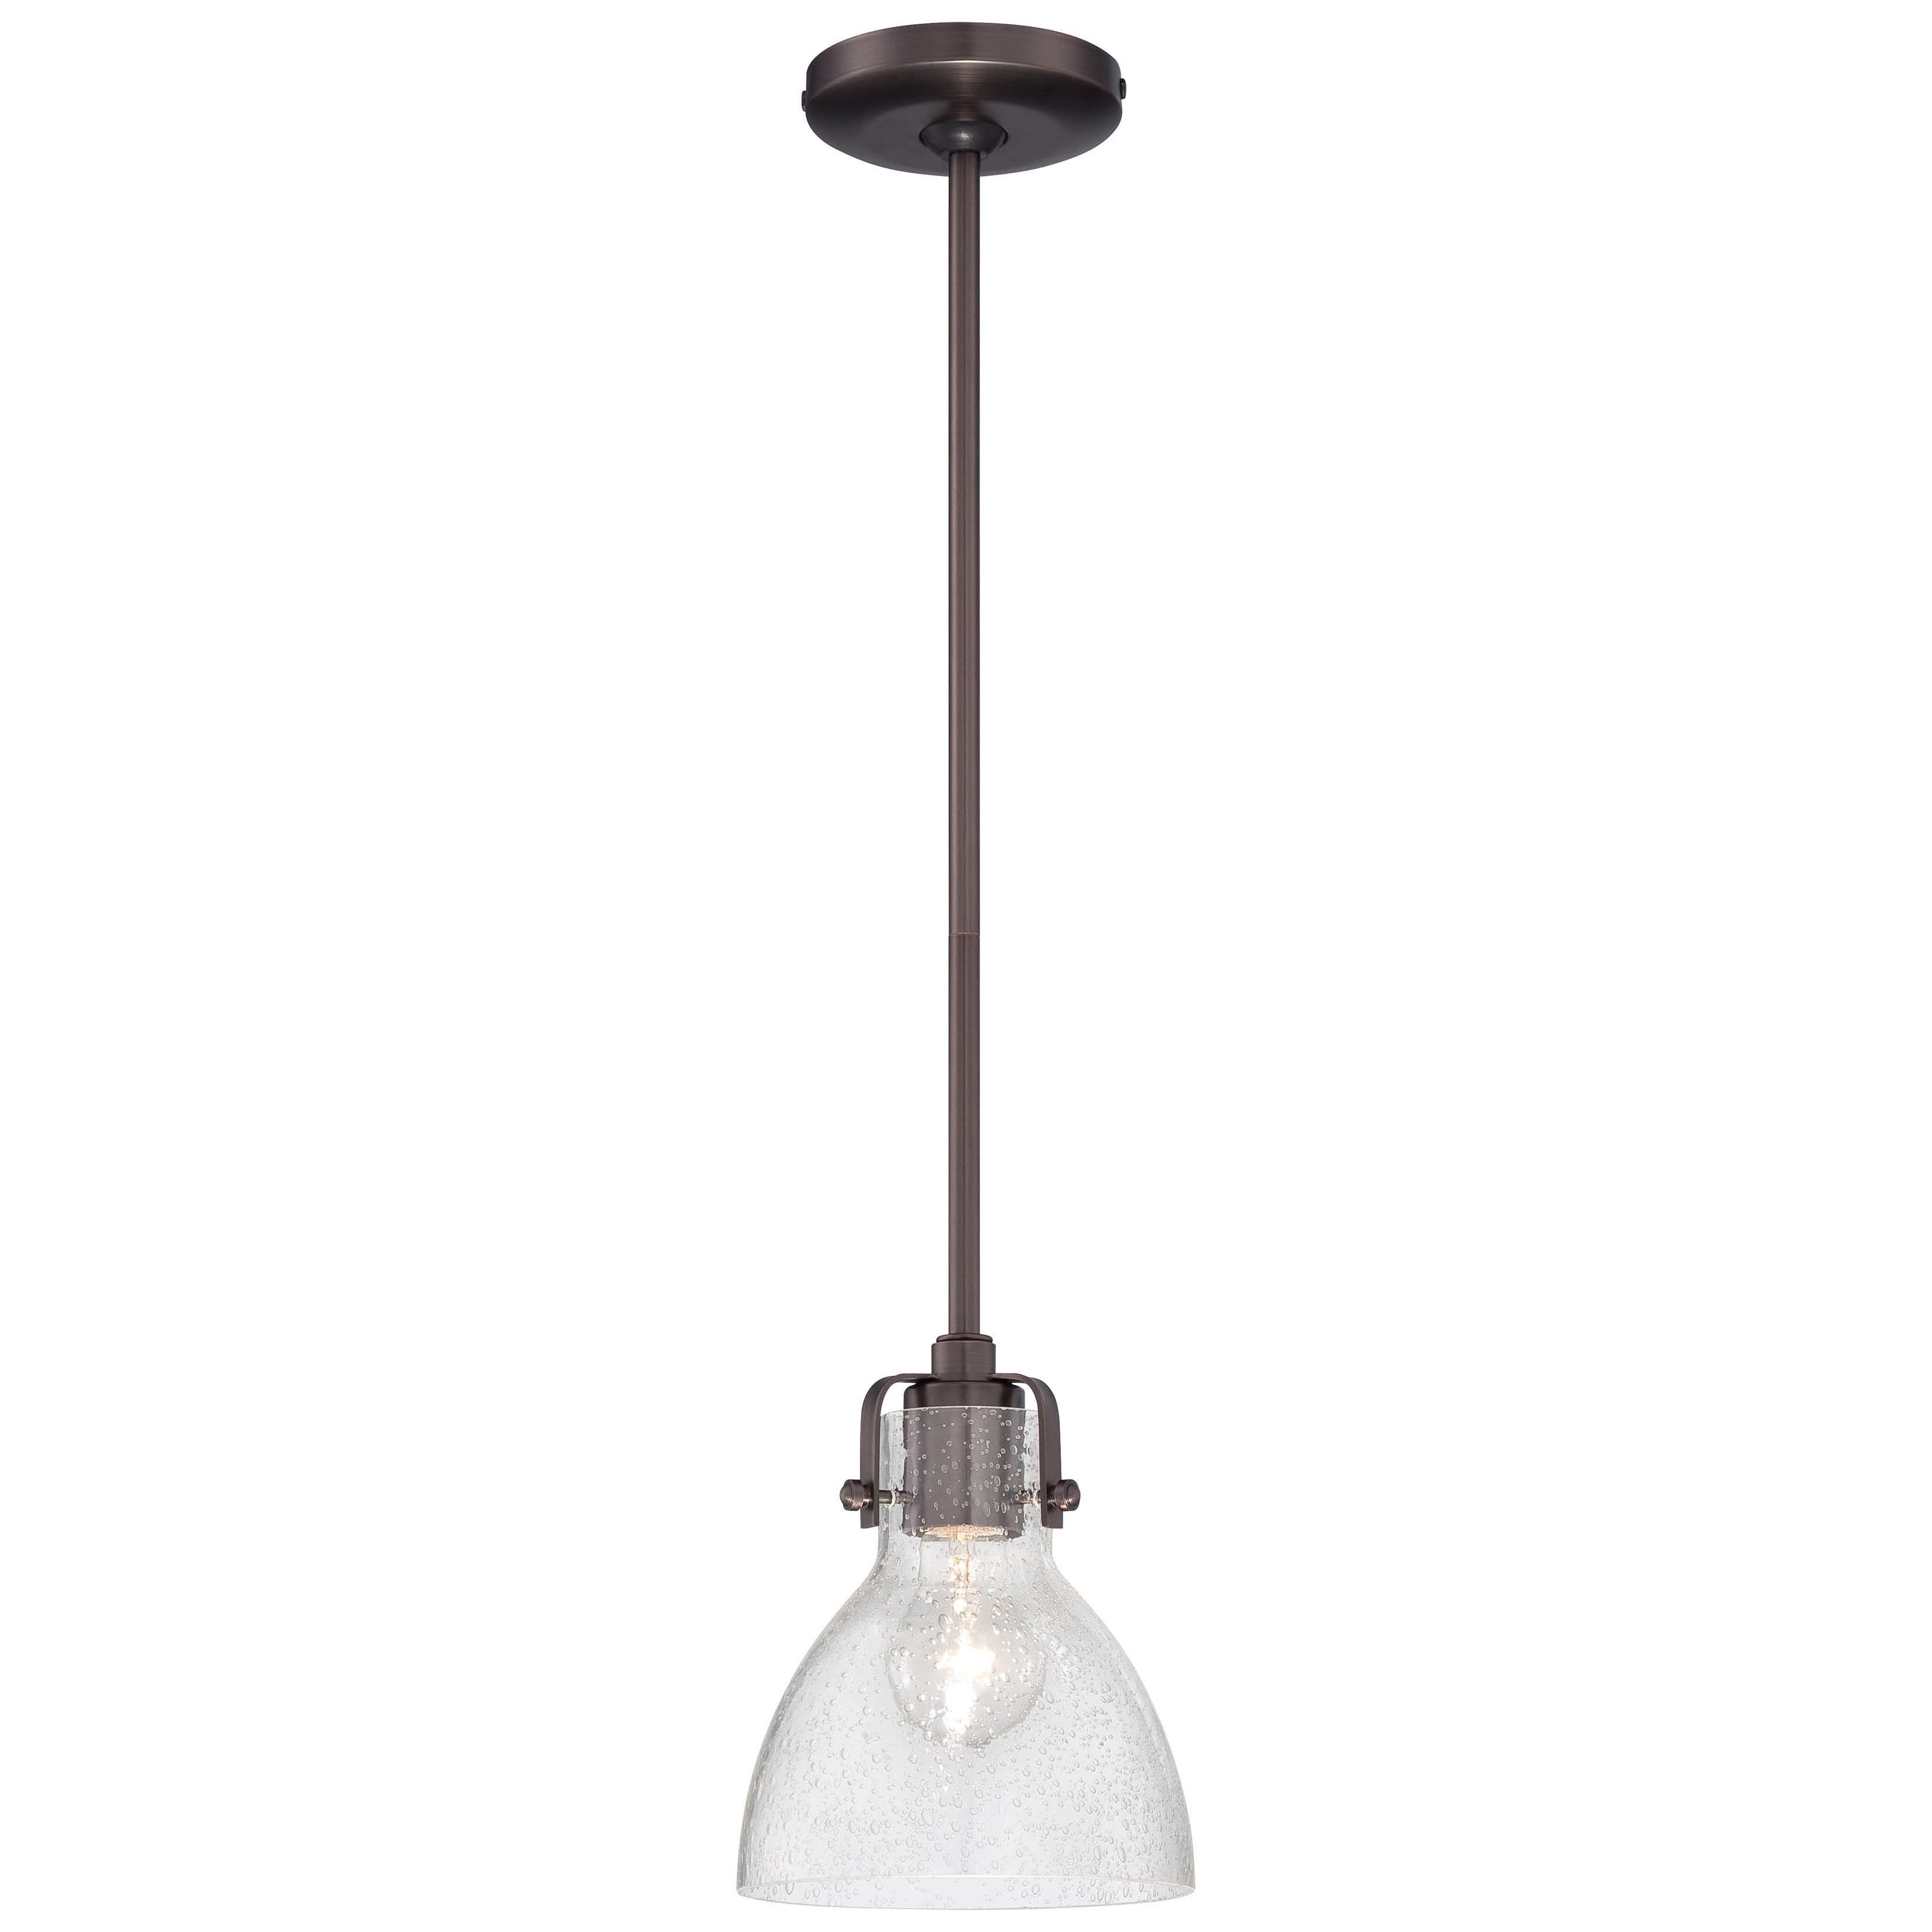 Goldie 1 Light Single Bell Pendant Throughout Bodalla 1 Light Single Bell Pendants (View 16 of 30)